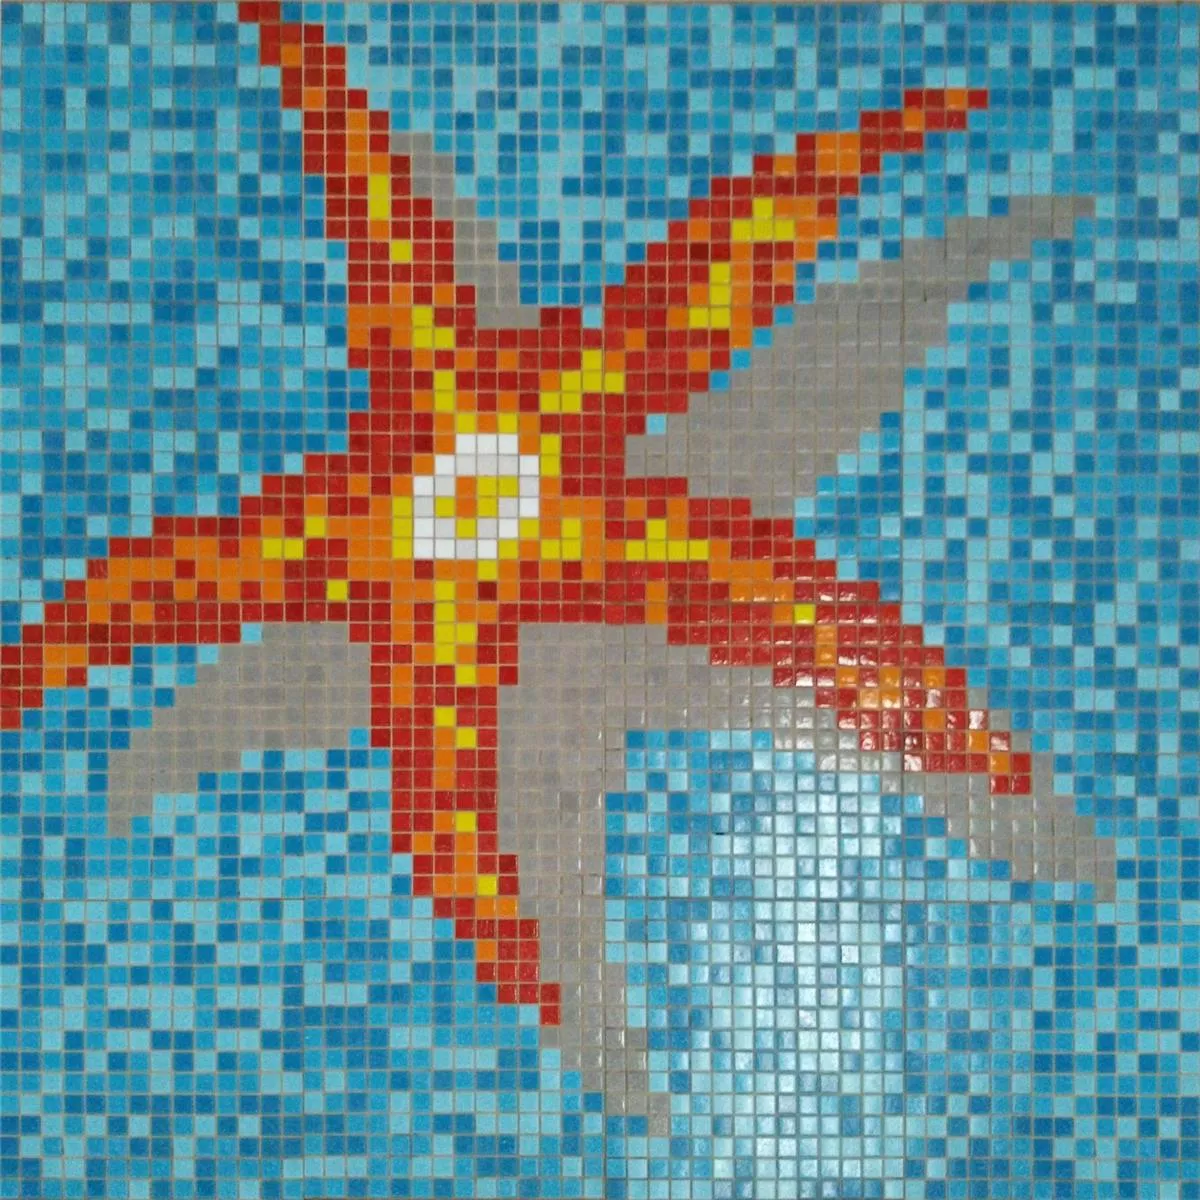 Swimming Pool Mosaic Seestar Pasted on Paper